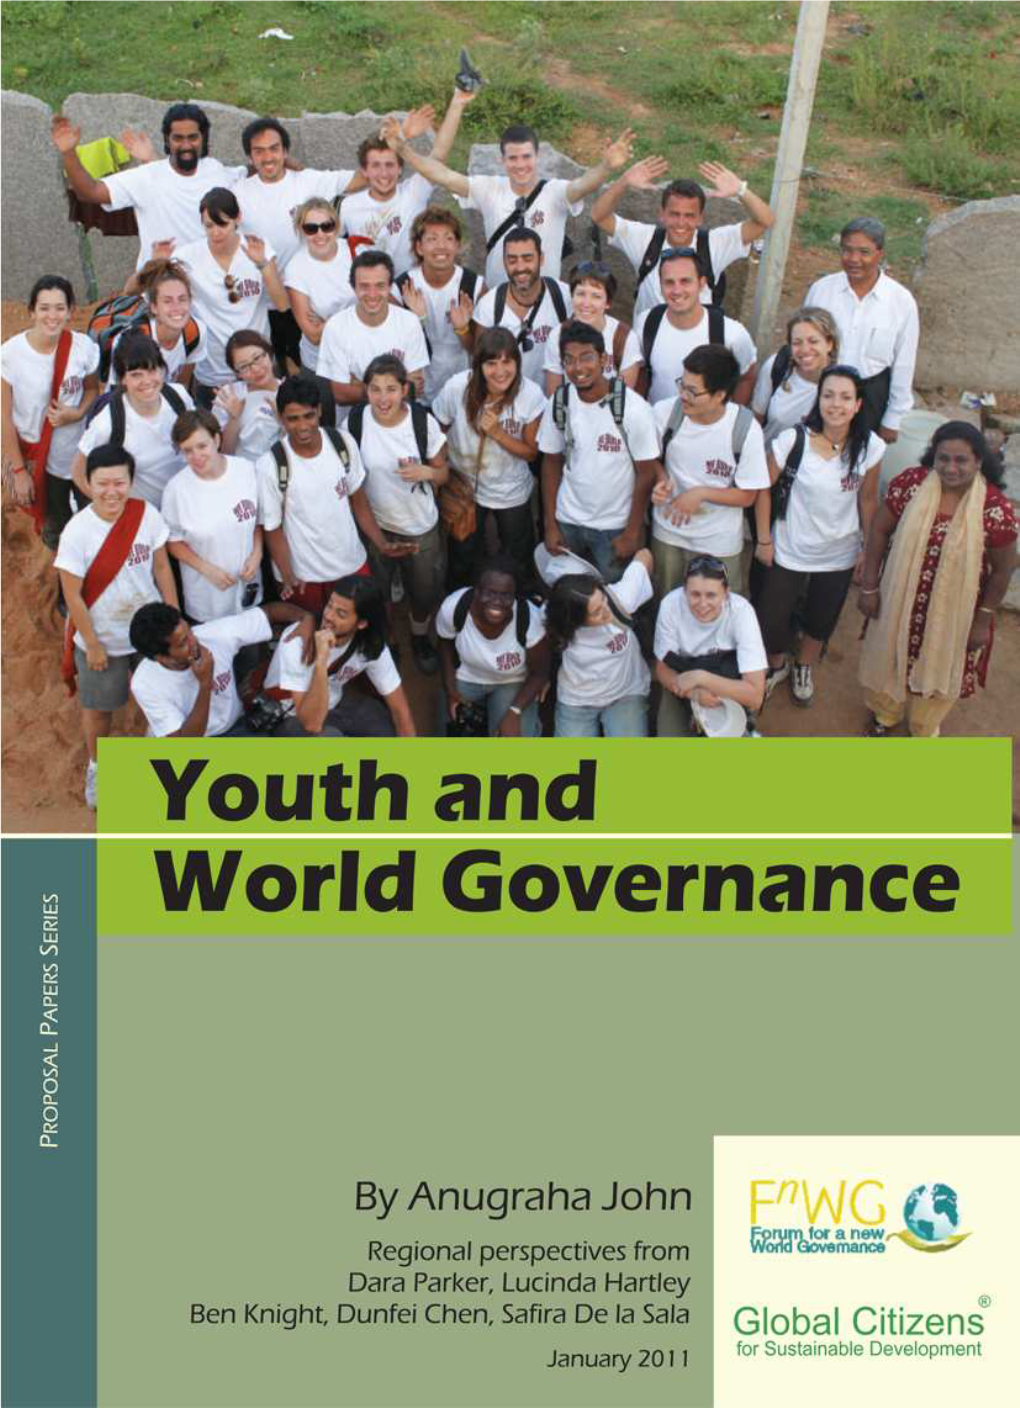 Youth and World Governance